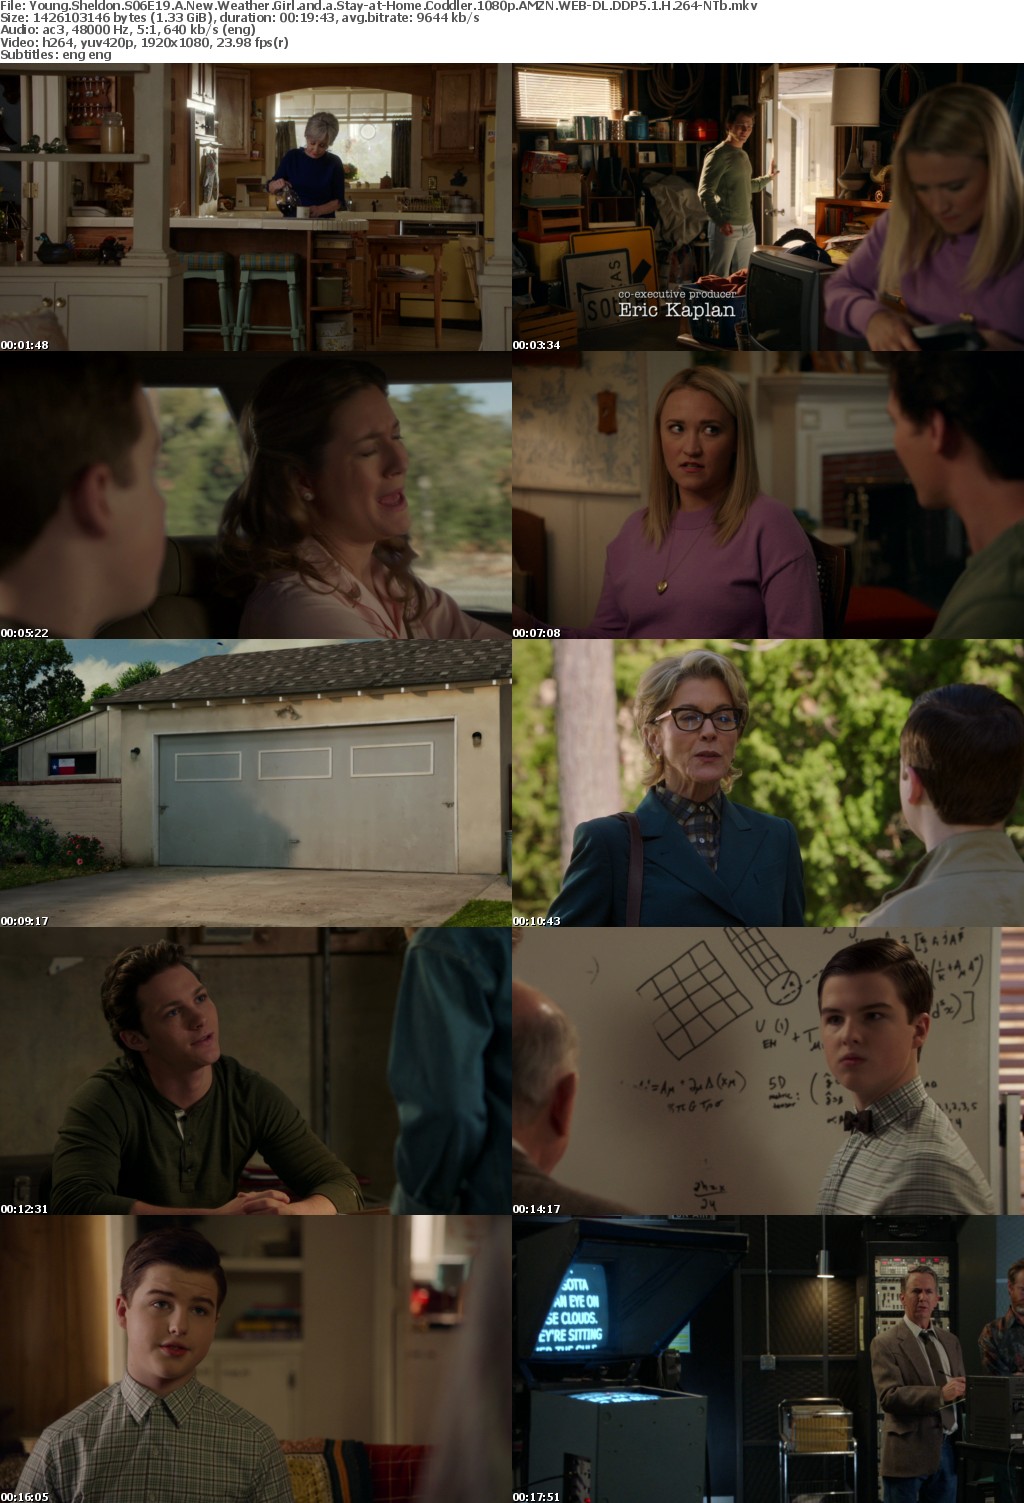 Young Sheldon S06E19 A New Weather Girl and a Stay-at-Home Coddler 1080p AMZN WEB-DL DDP5 1 H 264-NTb